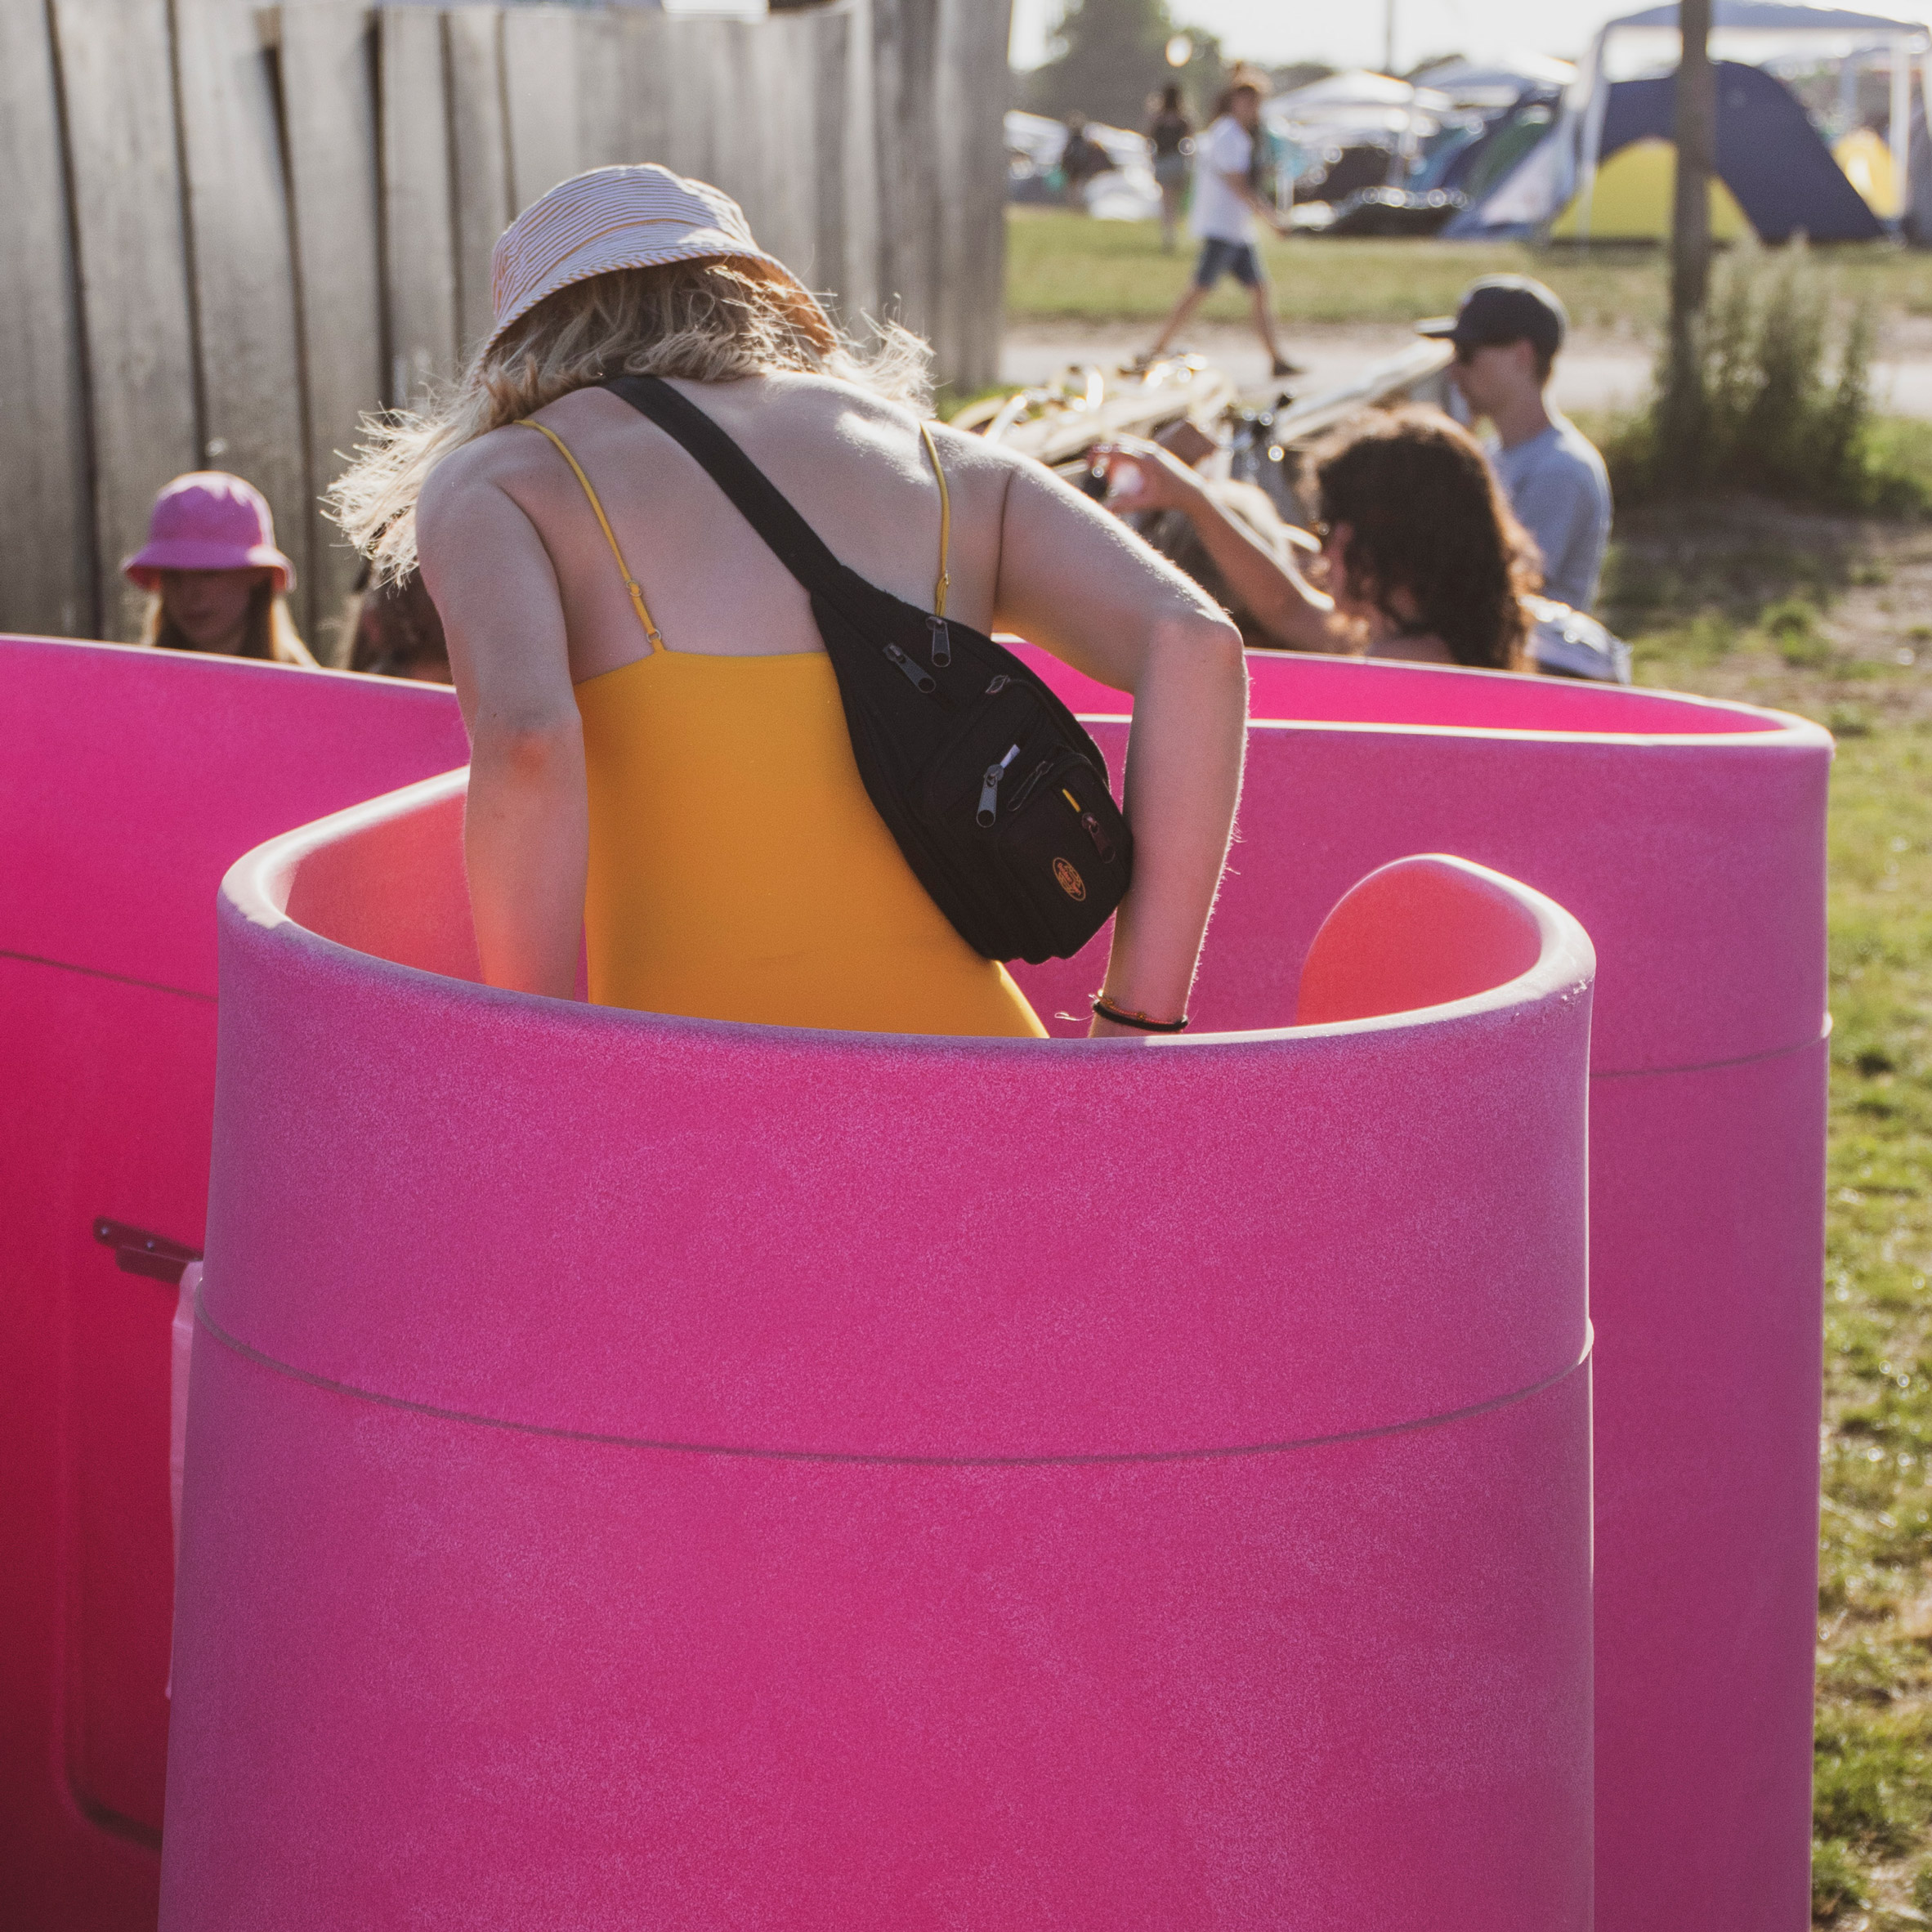 Lapee is an industrial-standard female urinal for festivals and outdoor events that allows people who need to pee sitting down to do so quickly and safely.